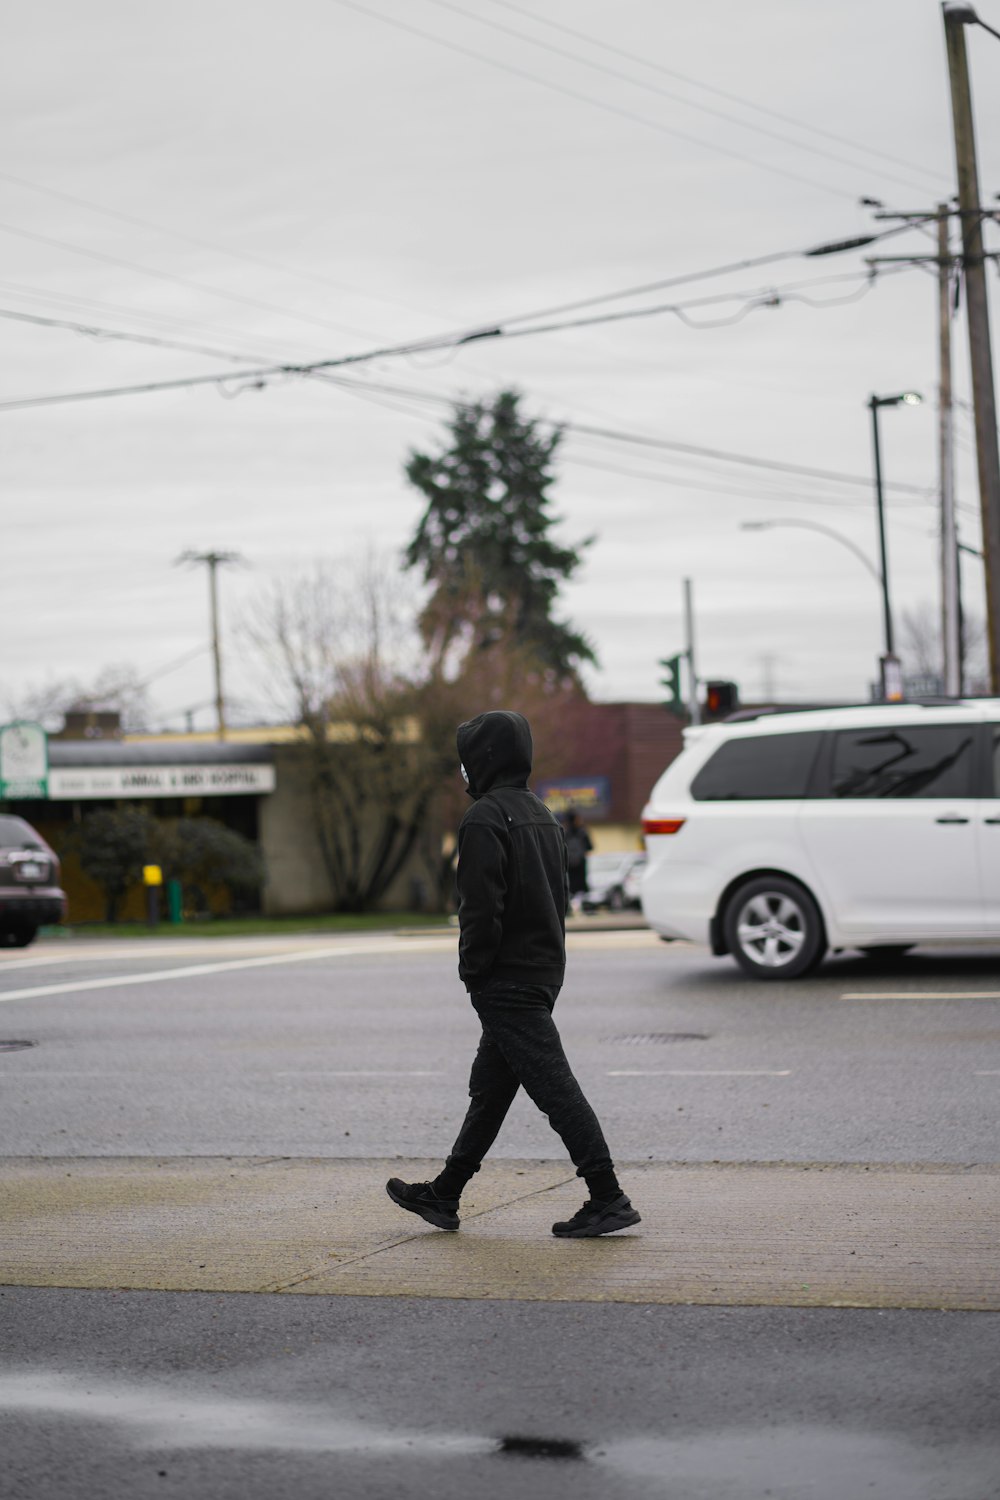 a person walking on a street